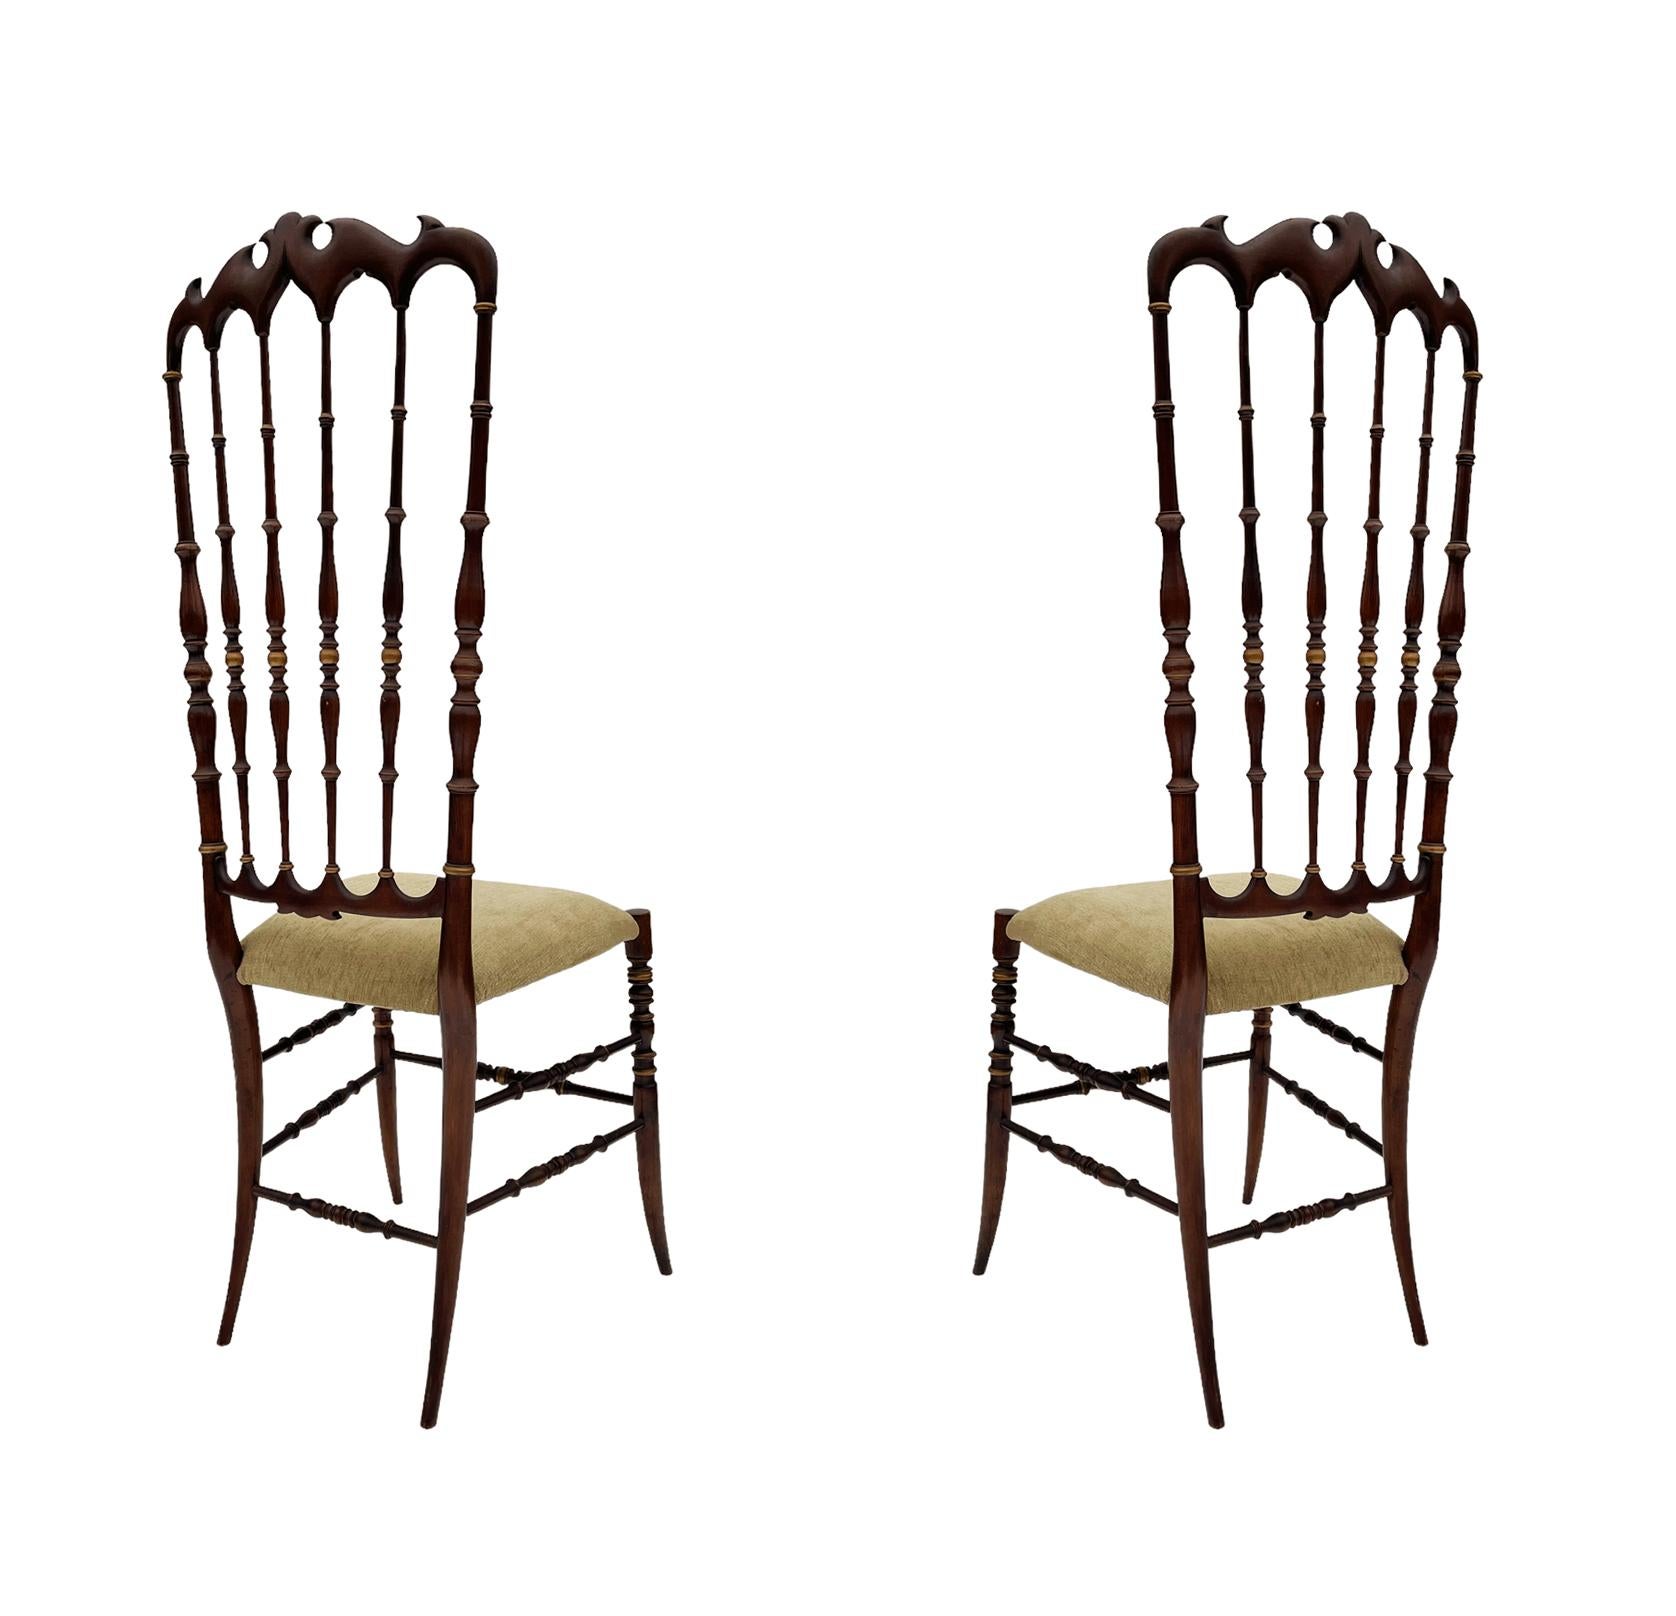 Pair of Hollywood Regency Italian Walnut Chiavari Chairs with Tall Ladder Backs  In Good Condition For Sale In Philadelphia, PA